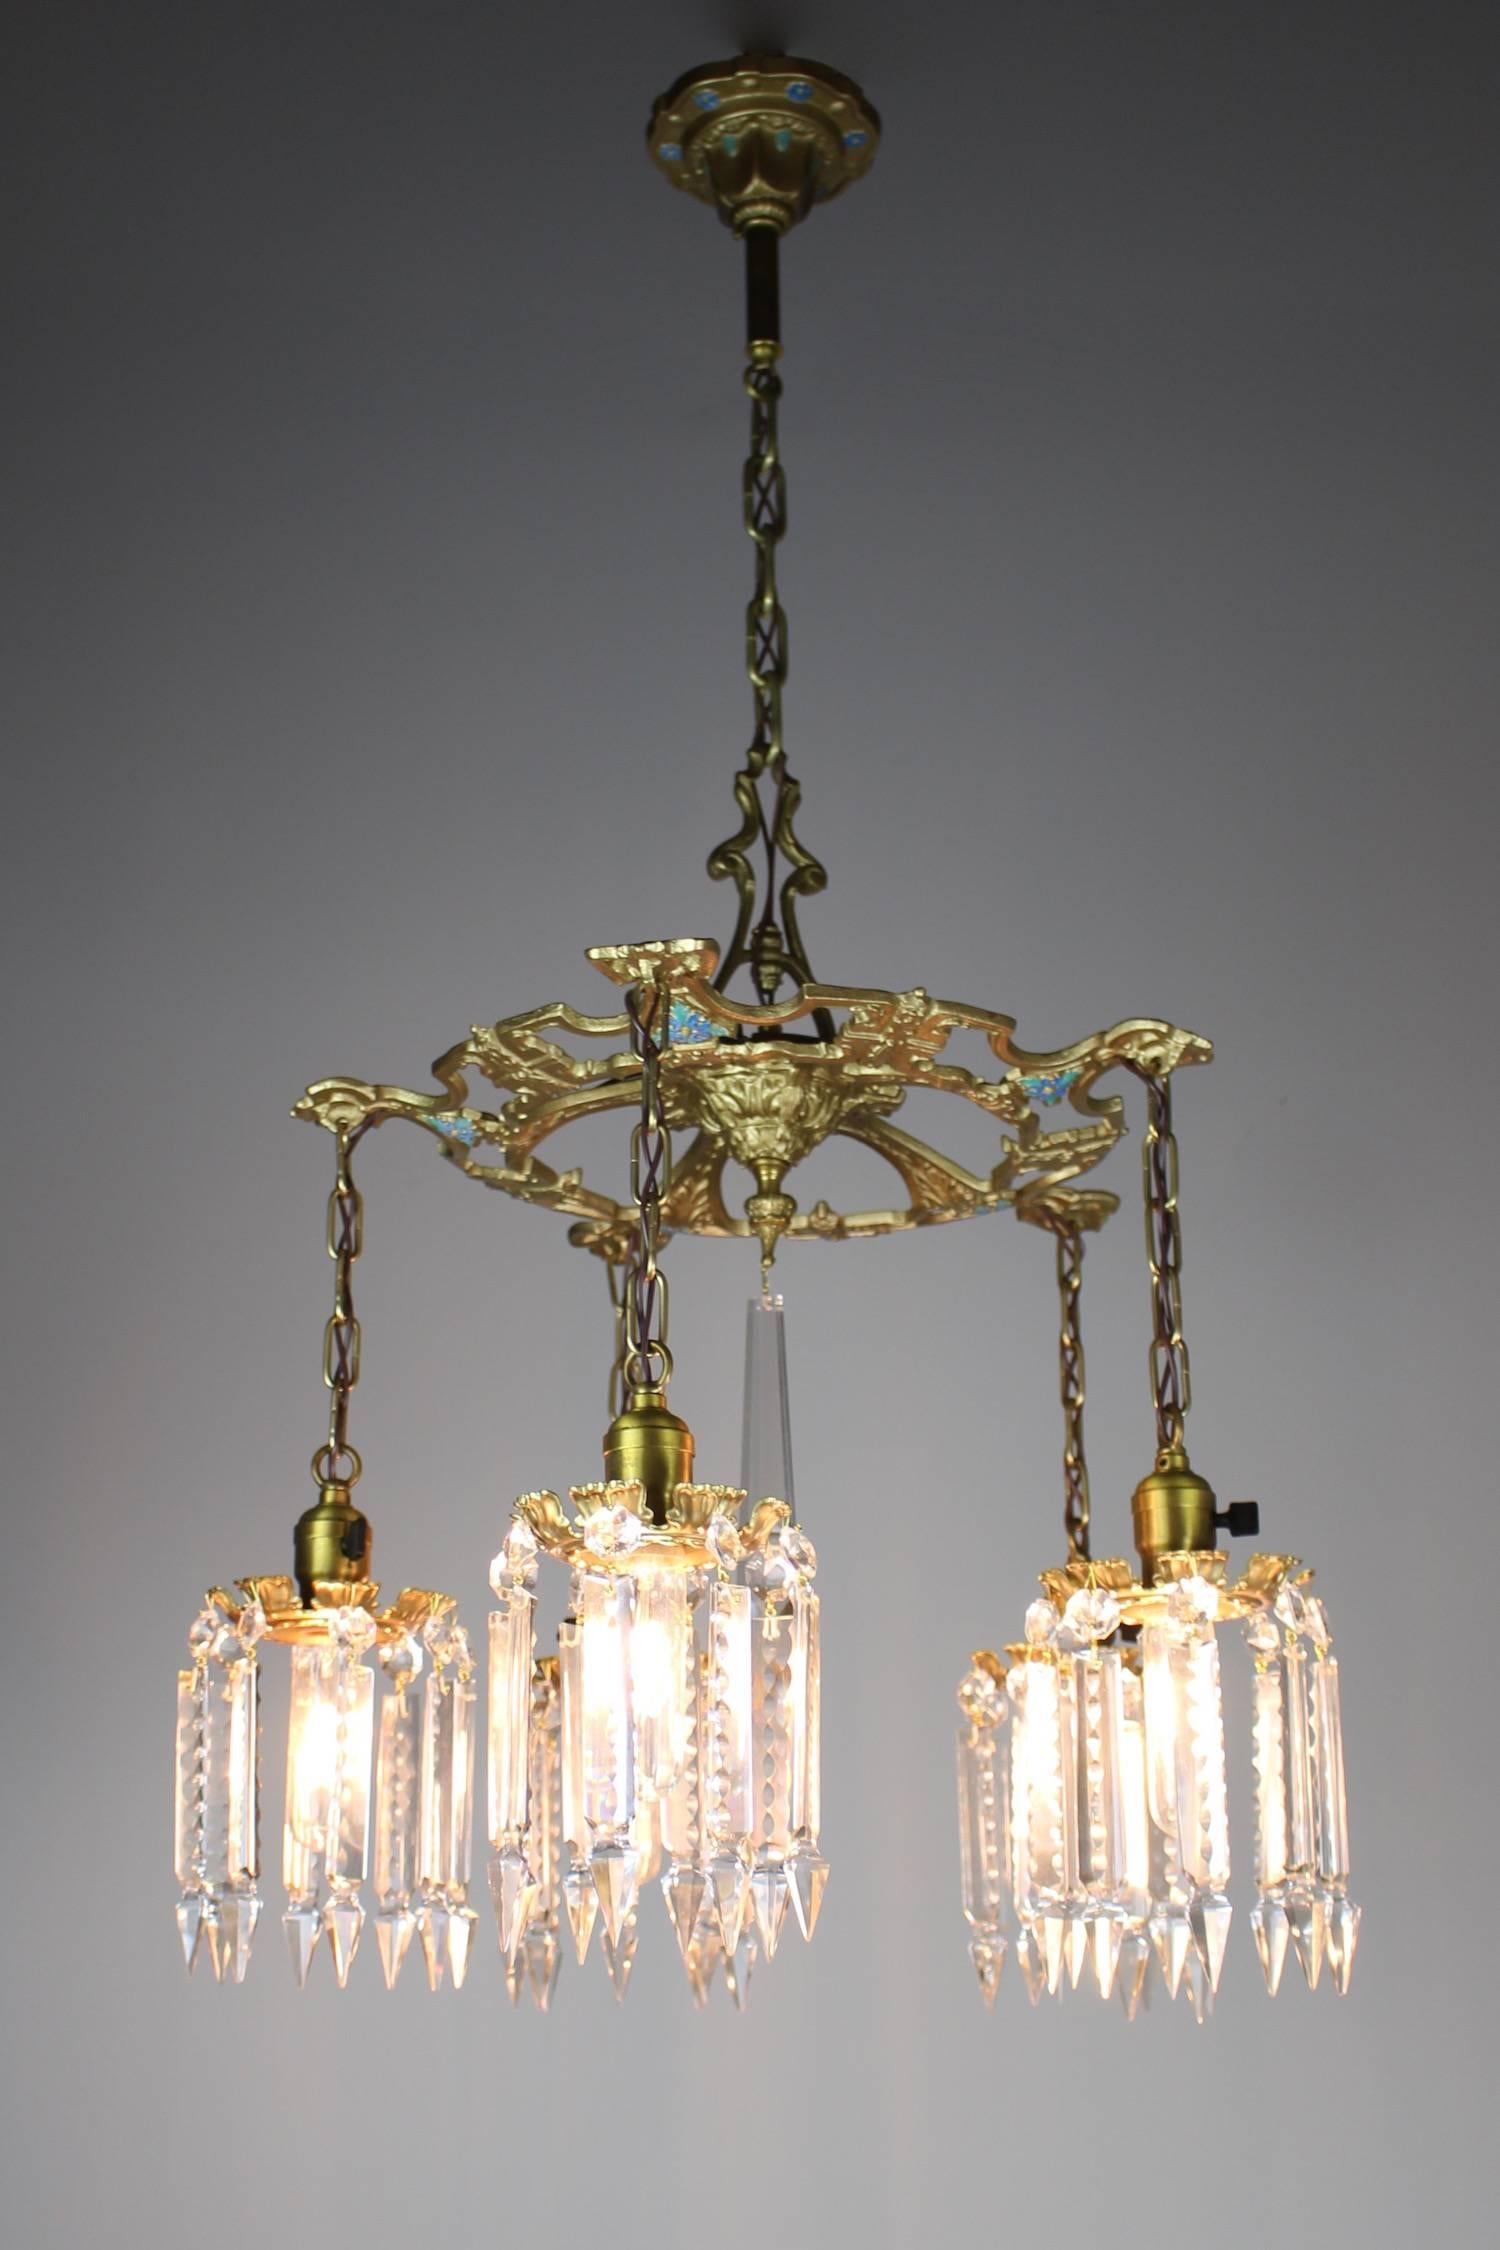 Found in Cleveland, Ohio, circa 1918. This lovely five-light Edwardian fixture is made of cast iron and painted gold. Fitted with cut crystal it makes for an airy yet substantial light - perfect for a dining room or entry way. This light has been